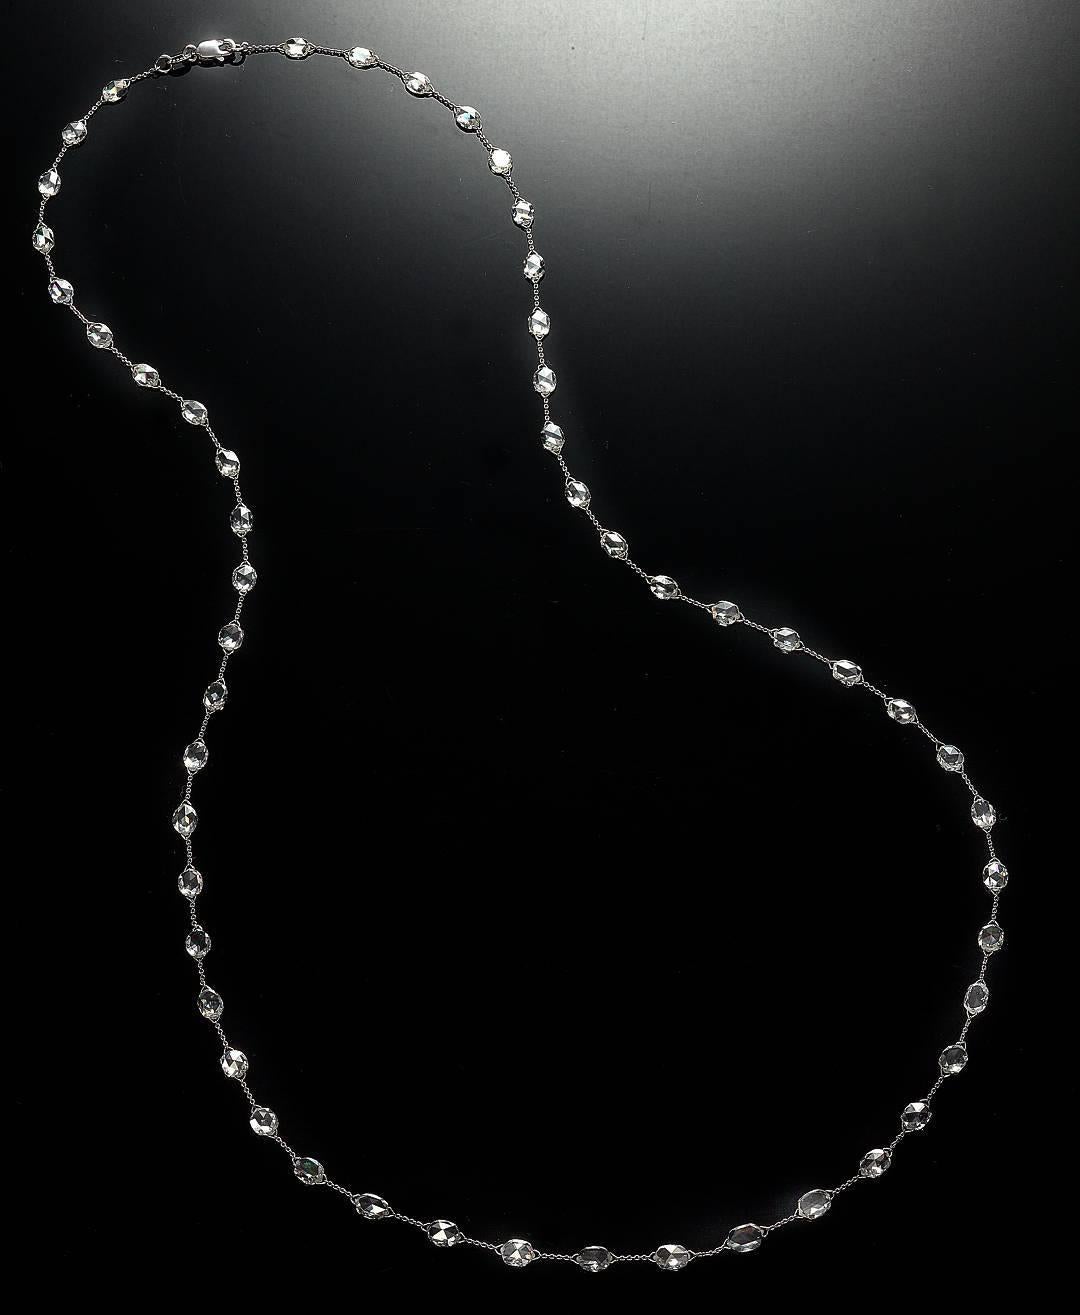 PANIM 5.72 carats Diamond Briolette Link 18K White Gold Necklace

Briolette-cut diamond bead chain necklace, set with thirty five diamonds weighing 5.72 total carats, the diamonds spaced approximately 1cms apart on an 18k white gold cable chain